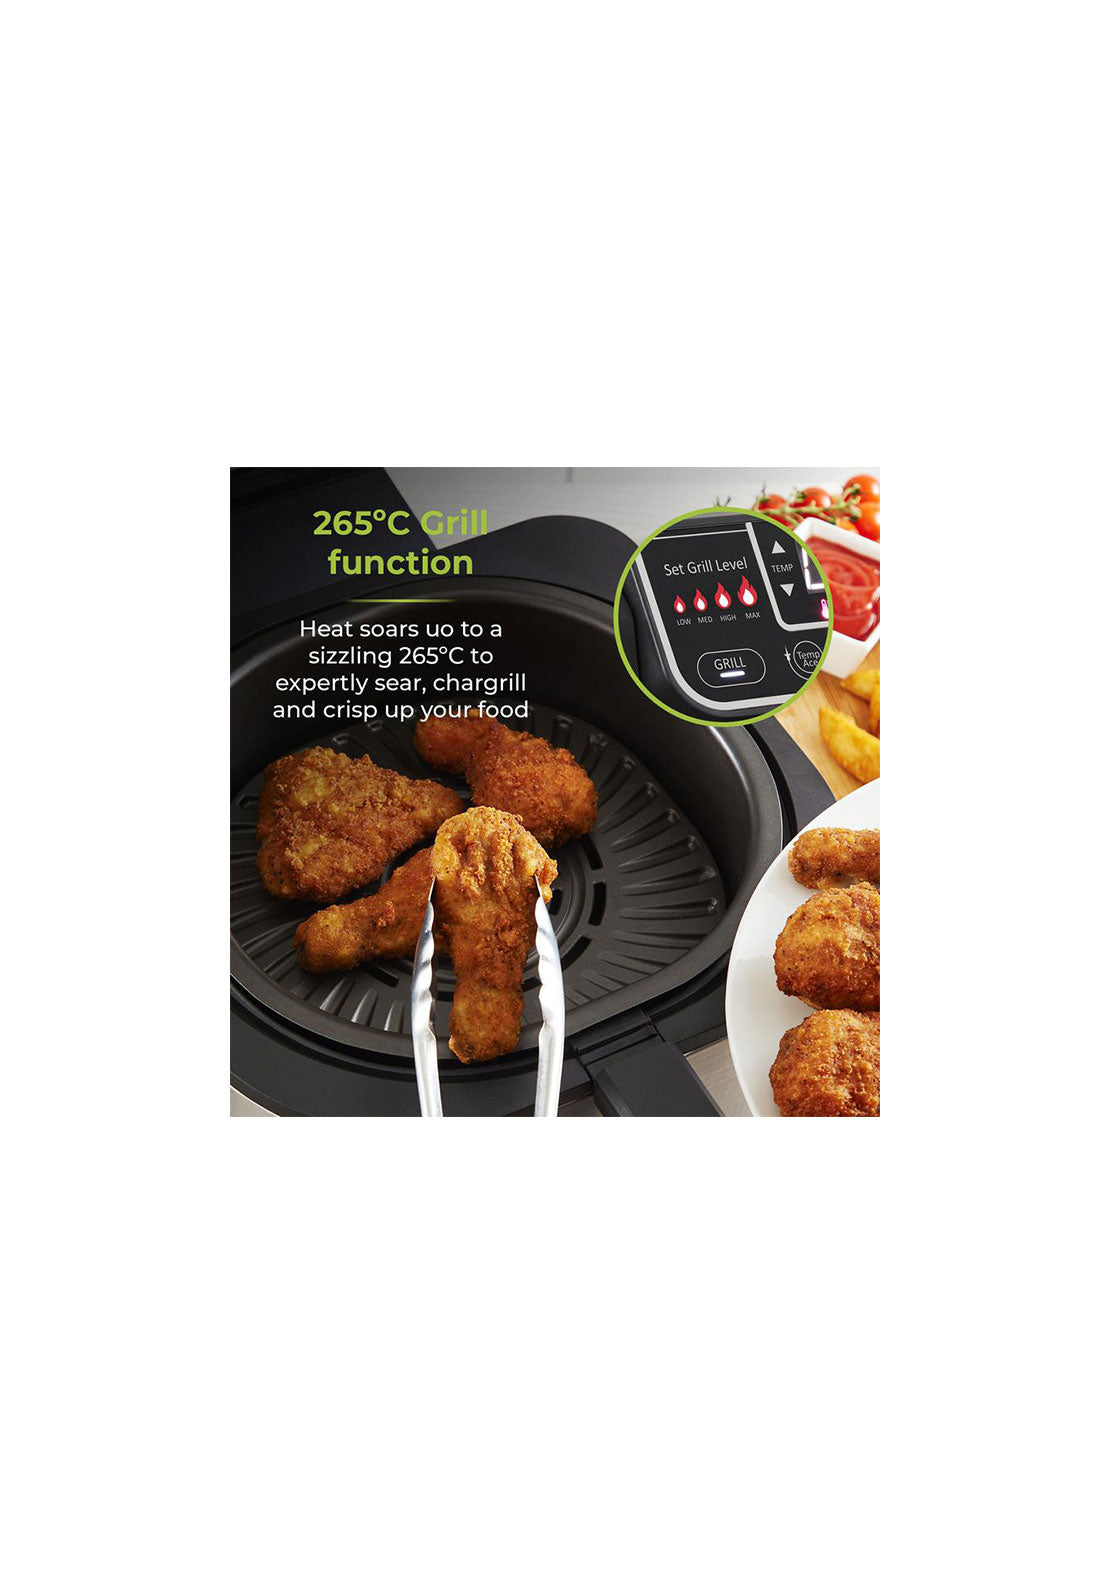 Tower 5.6L 5 In 1 Vortx 5.6L Air Fryer and Grill with Crisper | T17086 6 Shaws Department Stores